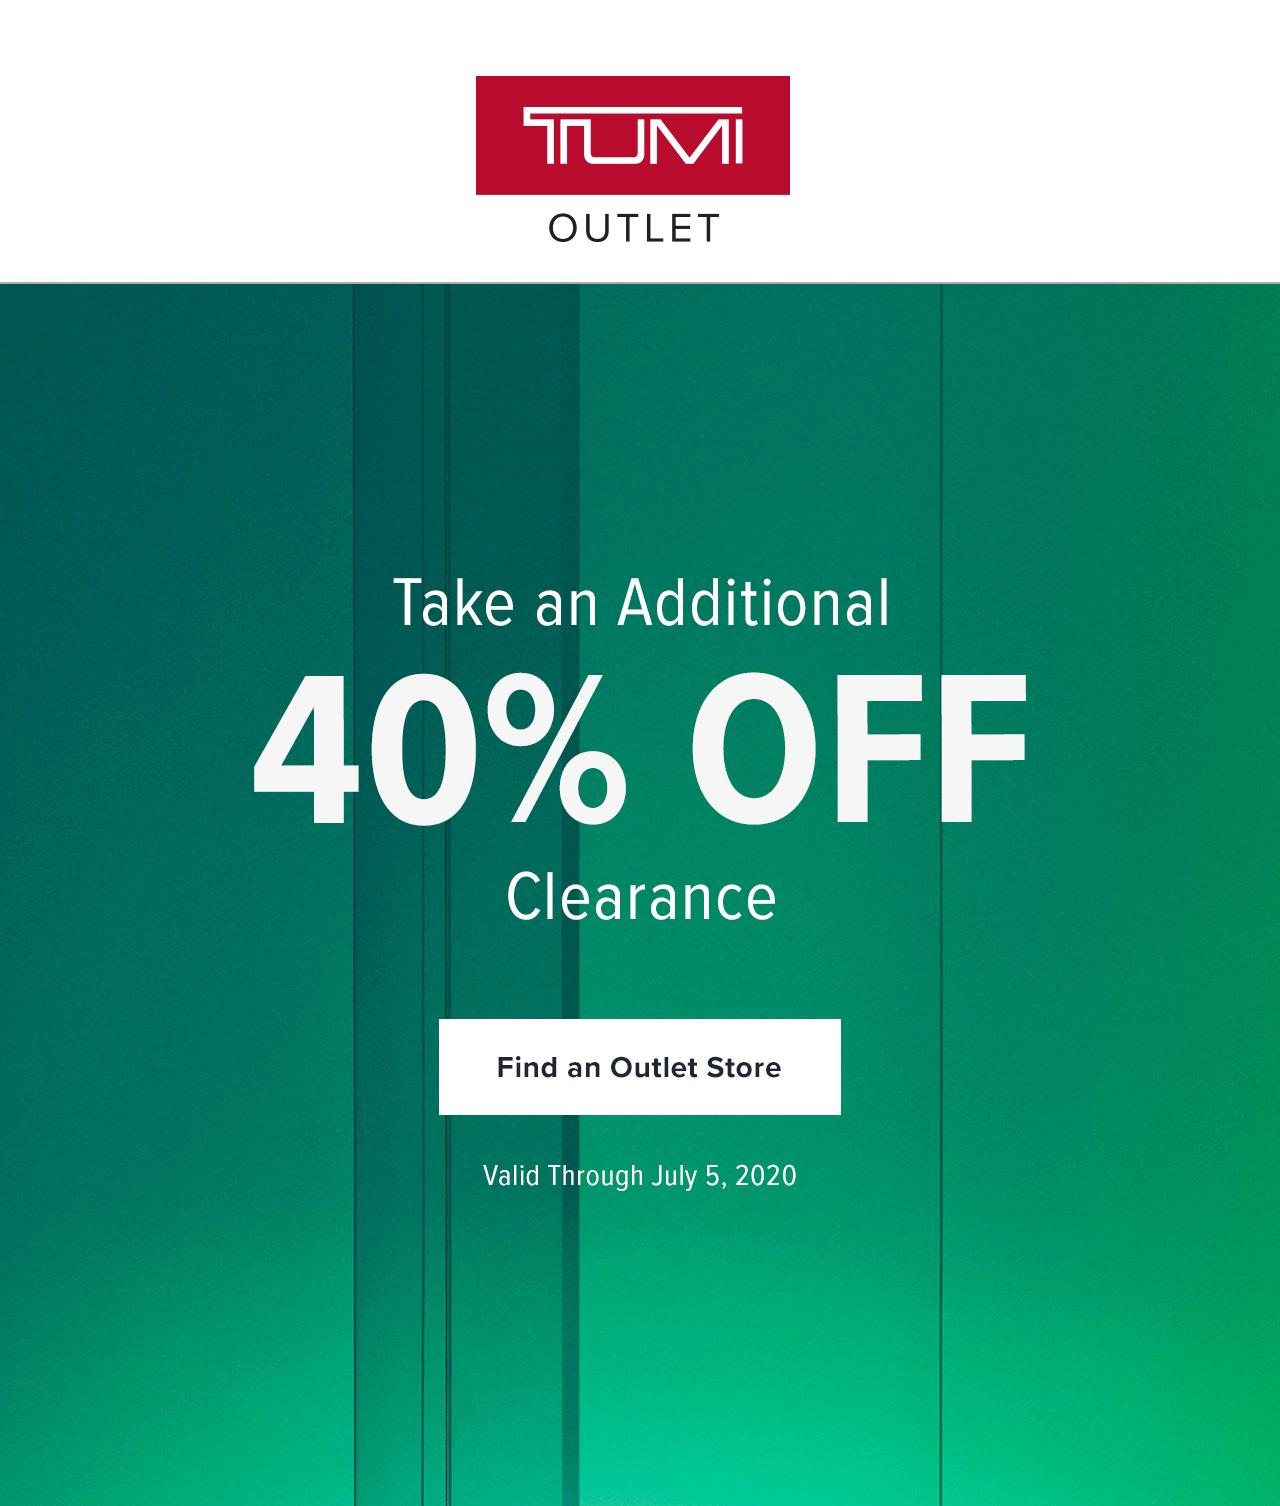 TUMI Outlet. Take an Additional 40% Off Clearance. Valid through July 5,2020. Find an Outlet Store